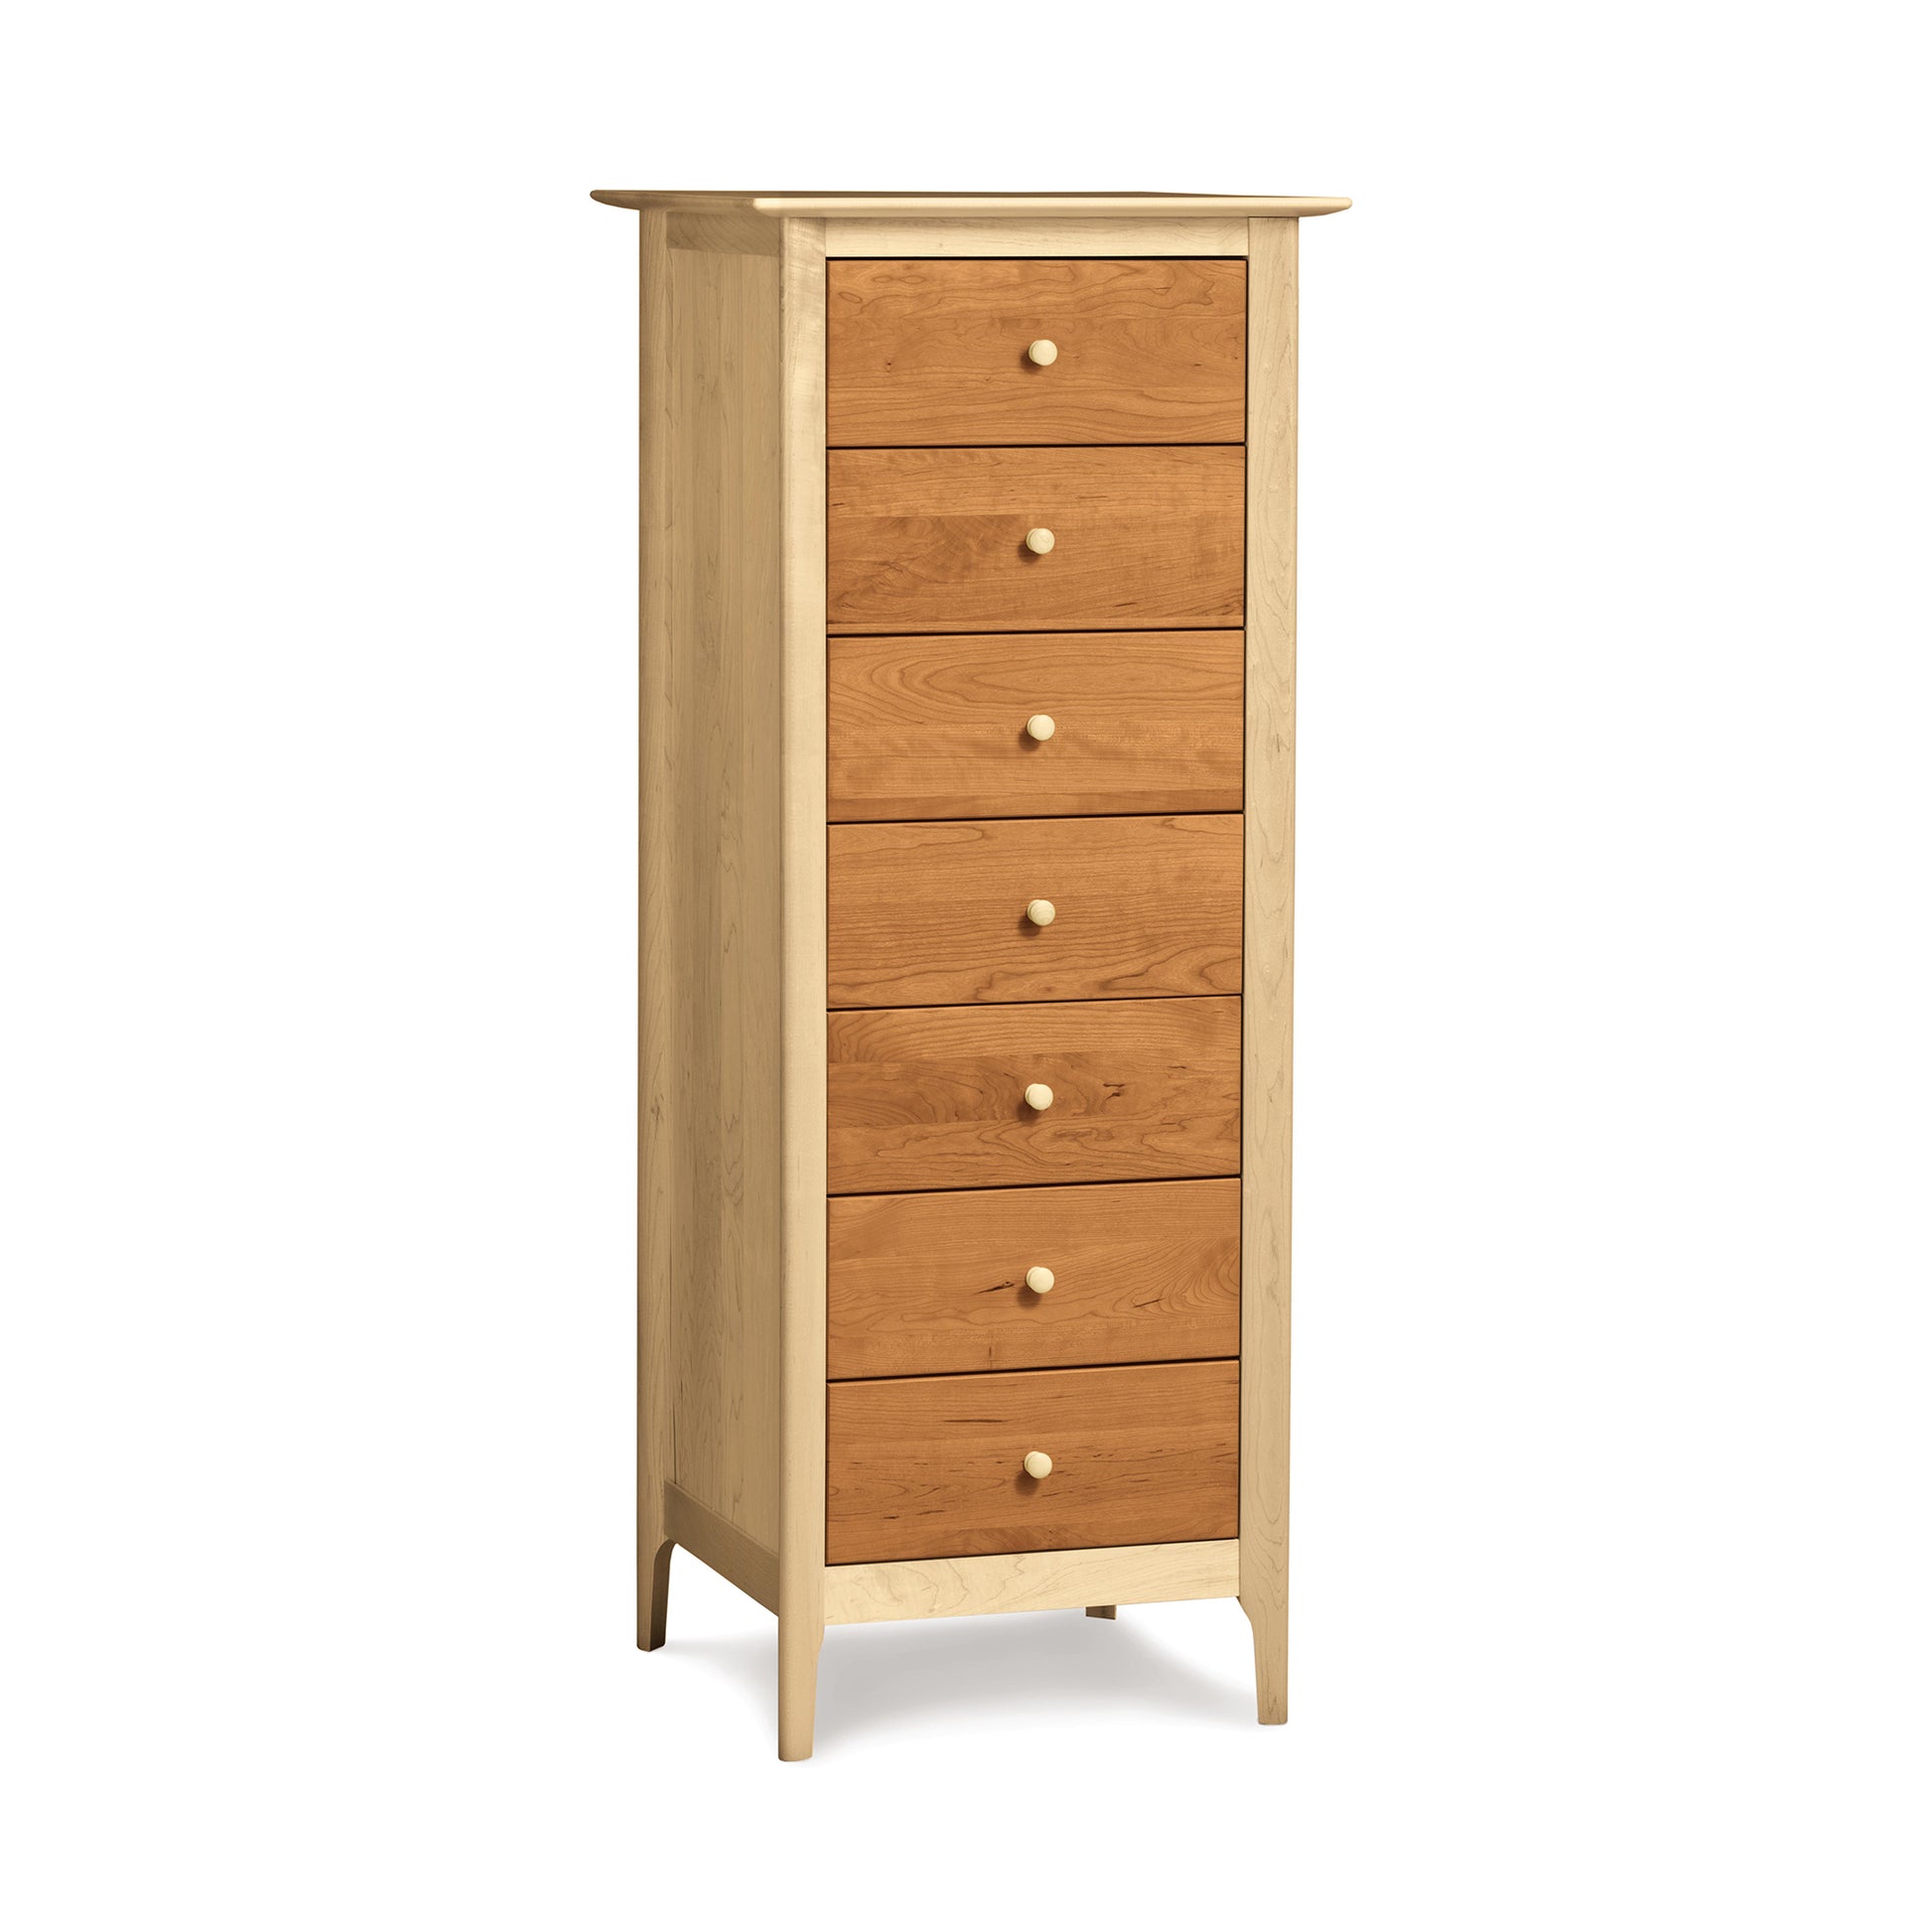 A tall, narrow Copeland Furniture Sarah 7-Drawer Lingerie Chest with five pull-out compartments, crafted from natural cherry wood.